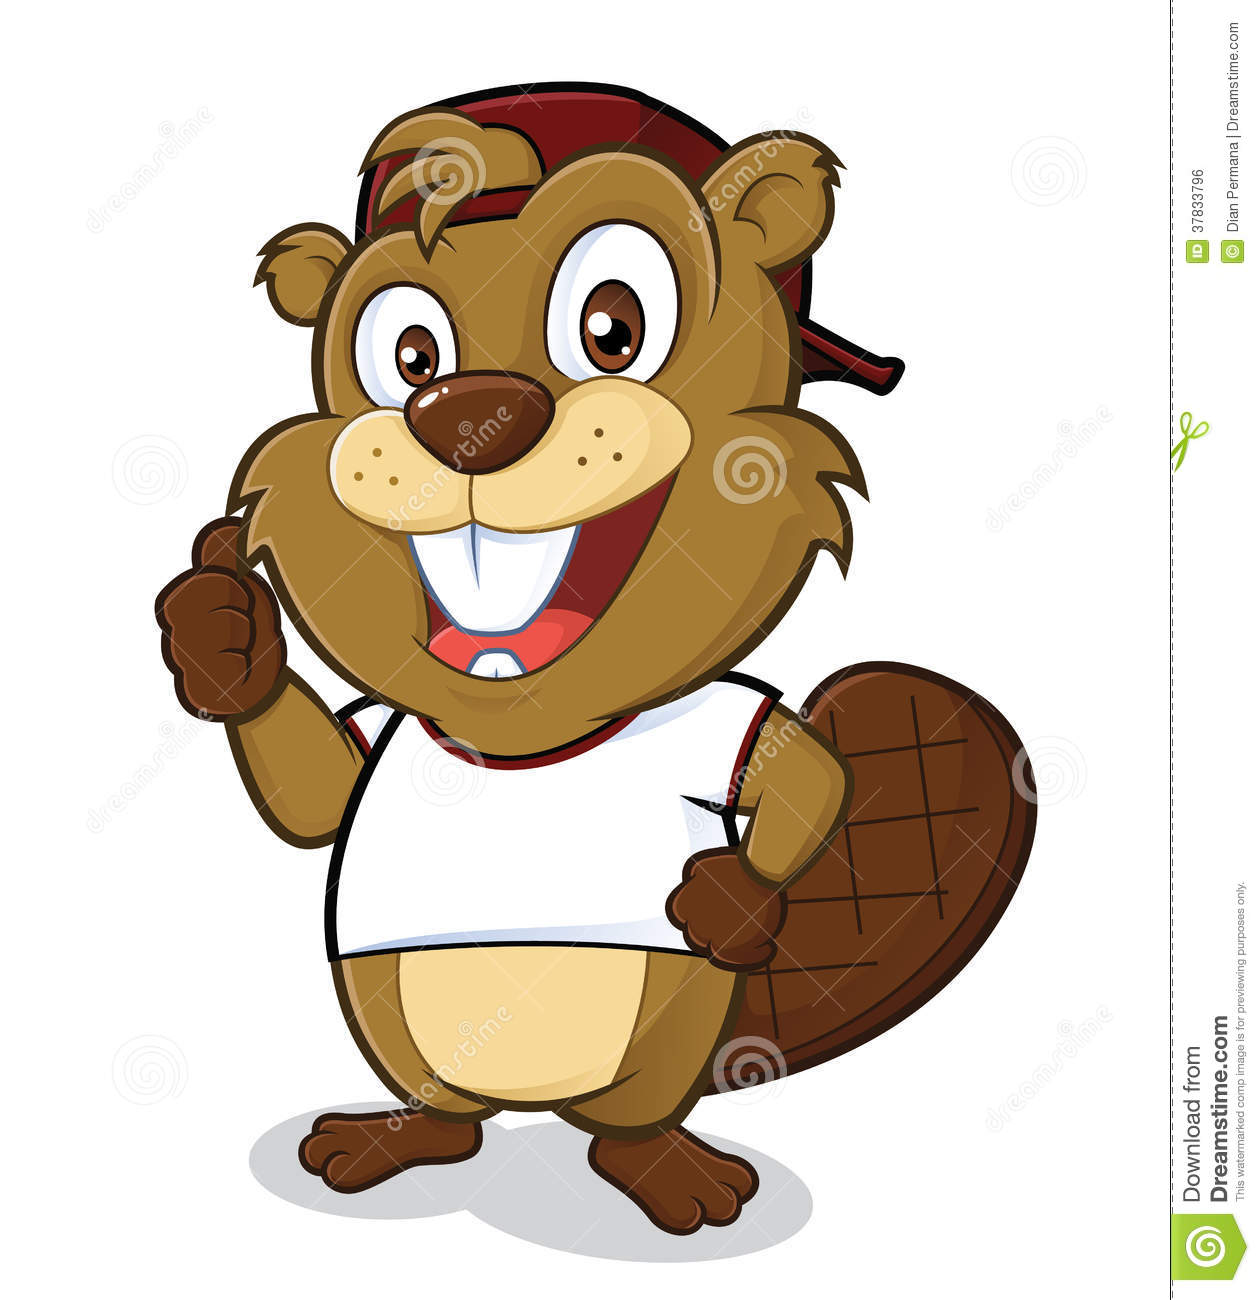 Beaver Wearing A Hat And A White T Shirt Royalty Free Stock Image